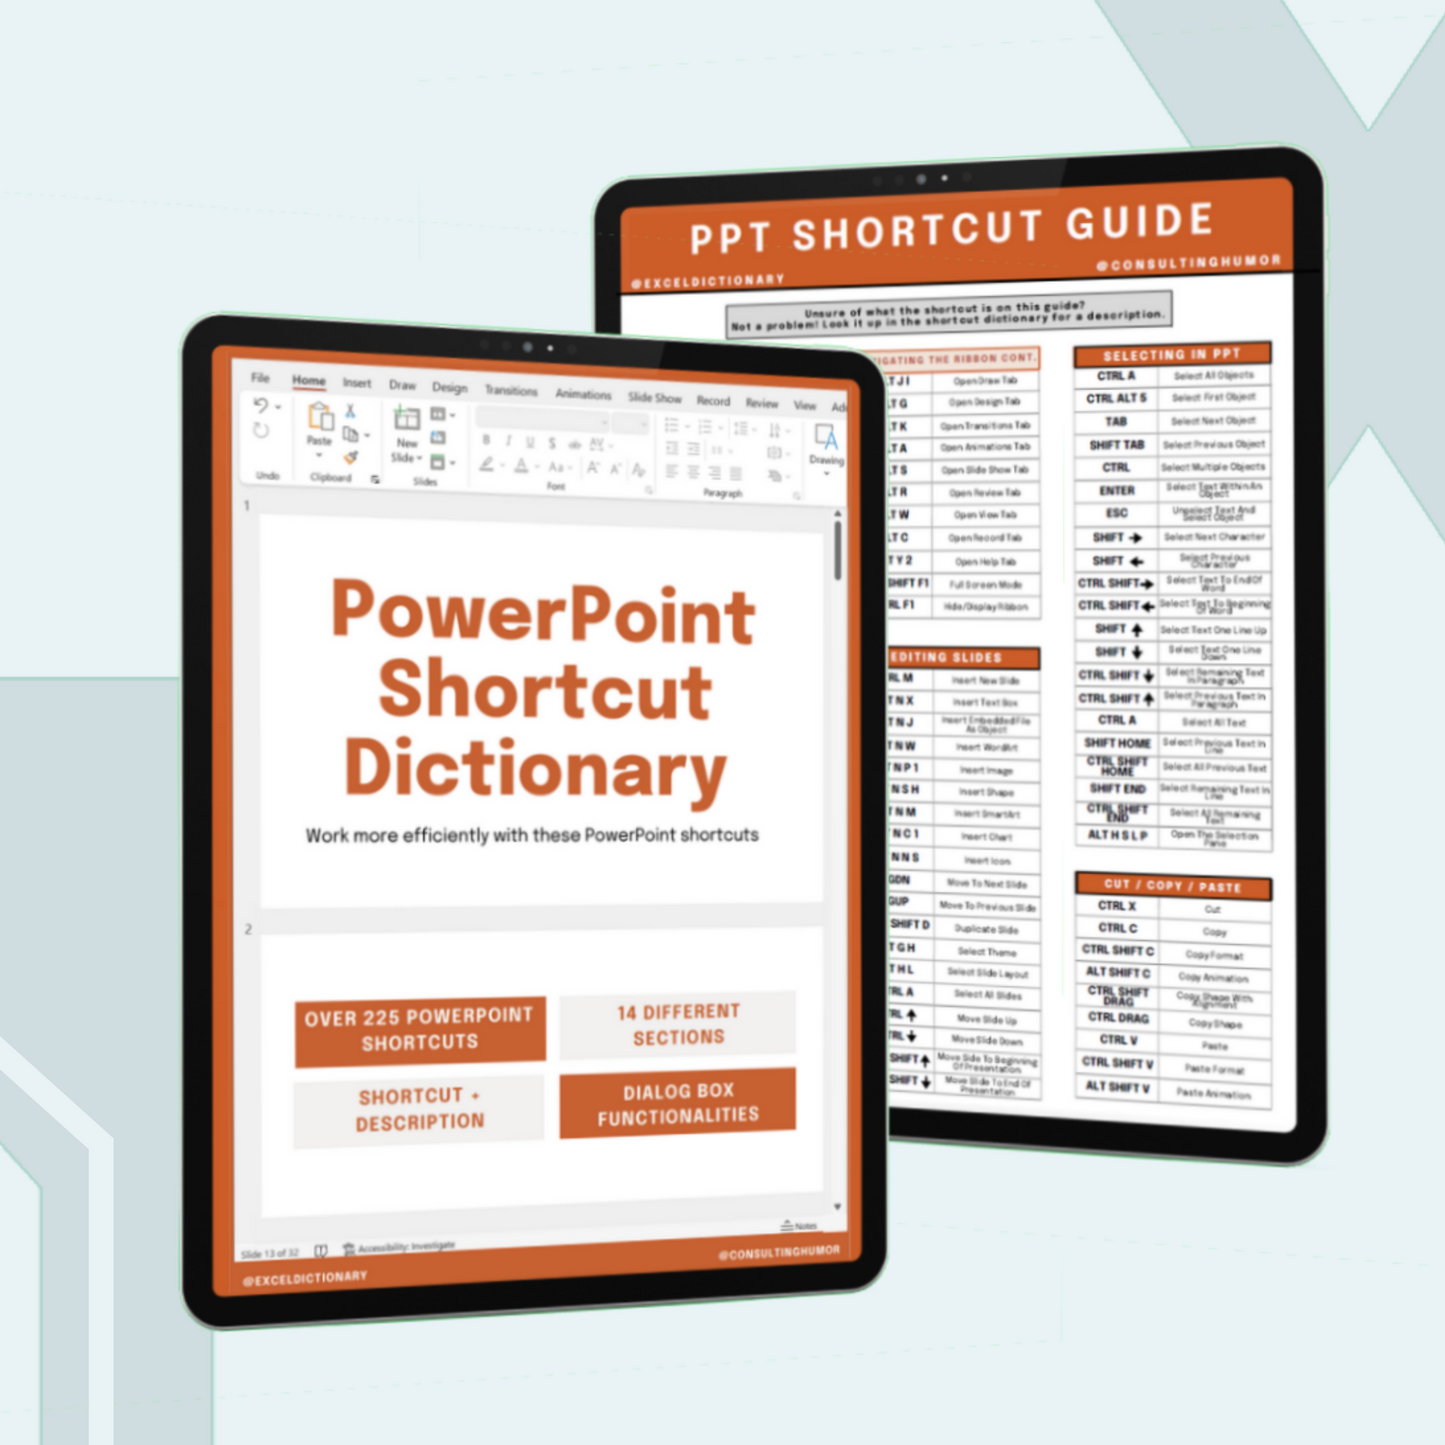 PowerPoint Shortcut Dictionary